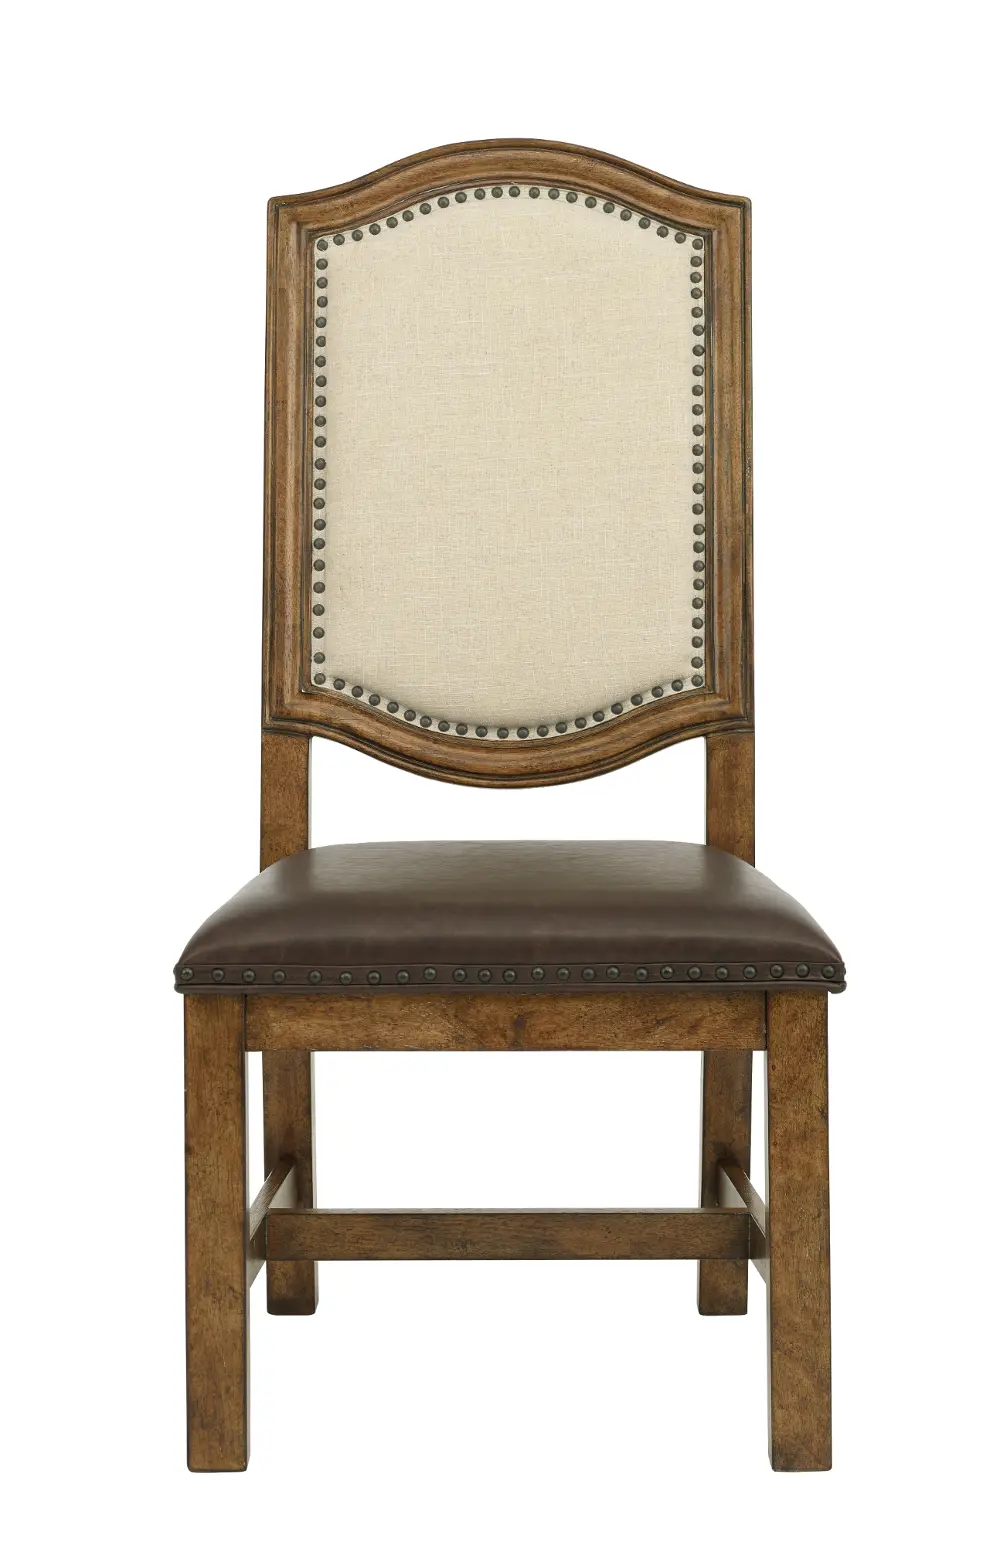 Oak and Cherry Dining Room Chair - American Attitude Collection-1